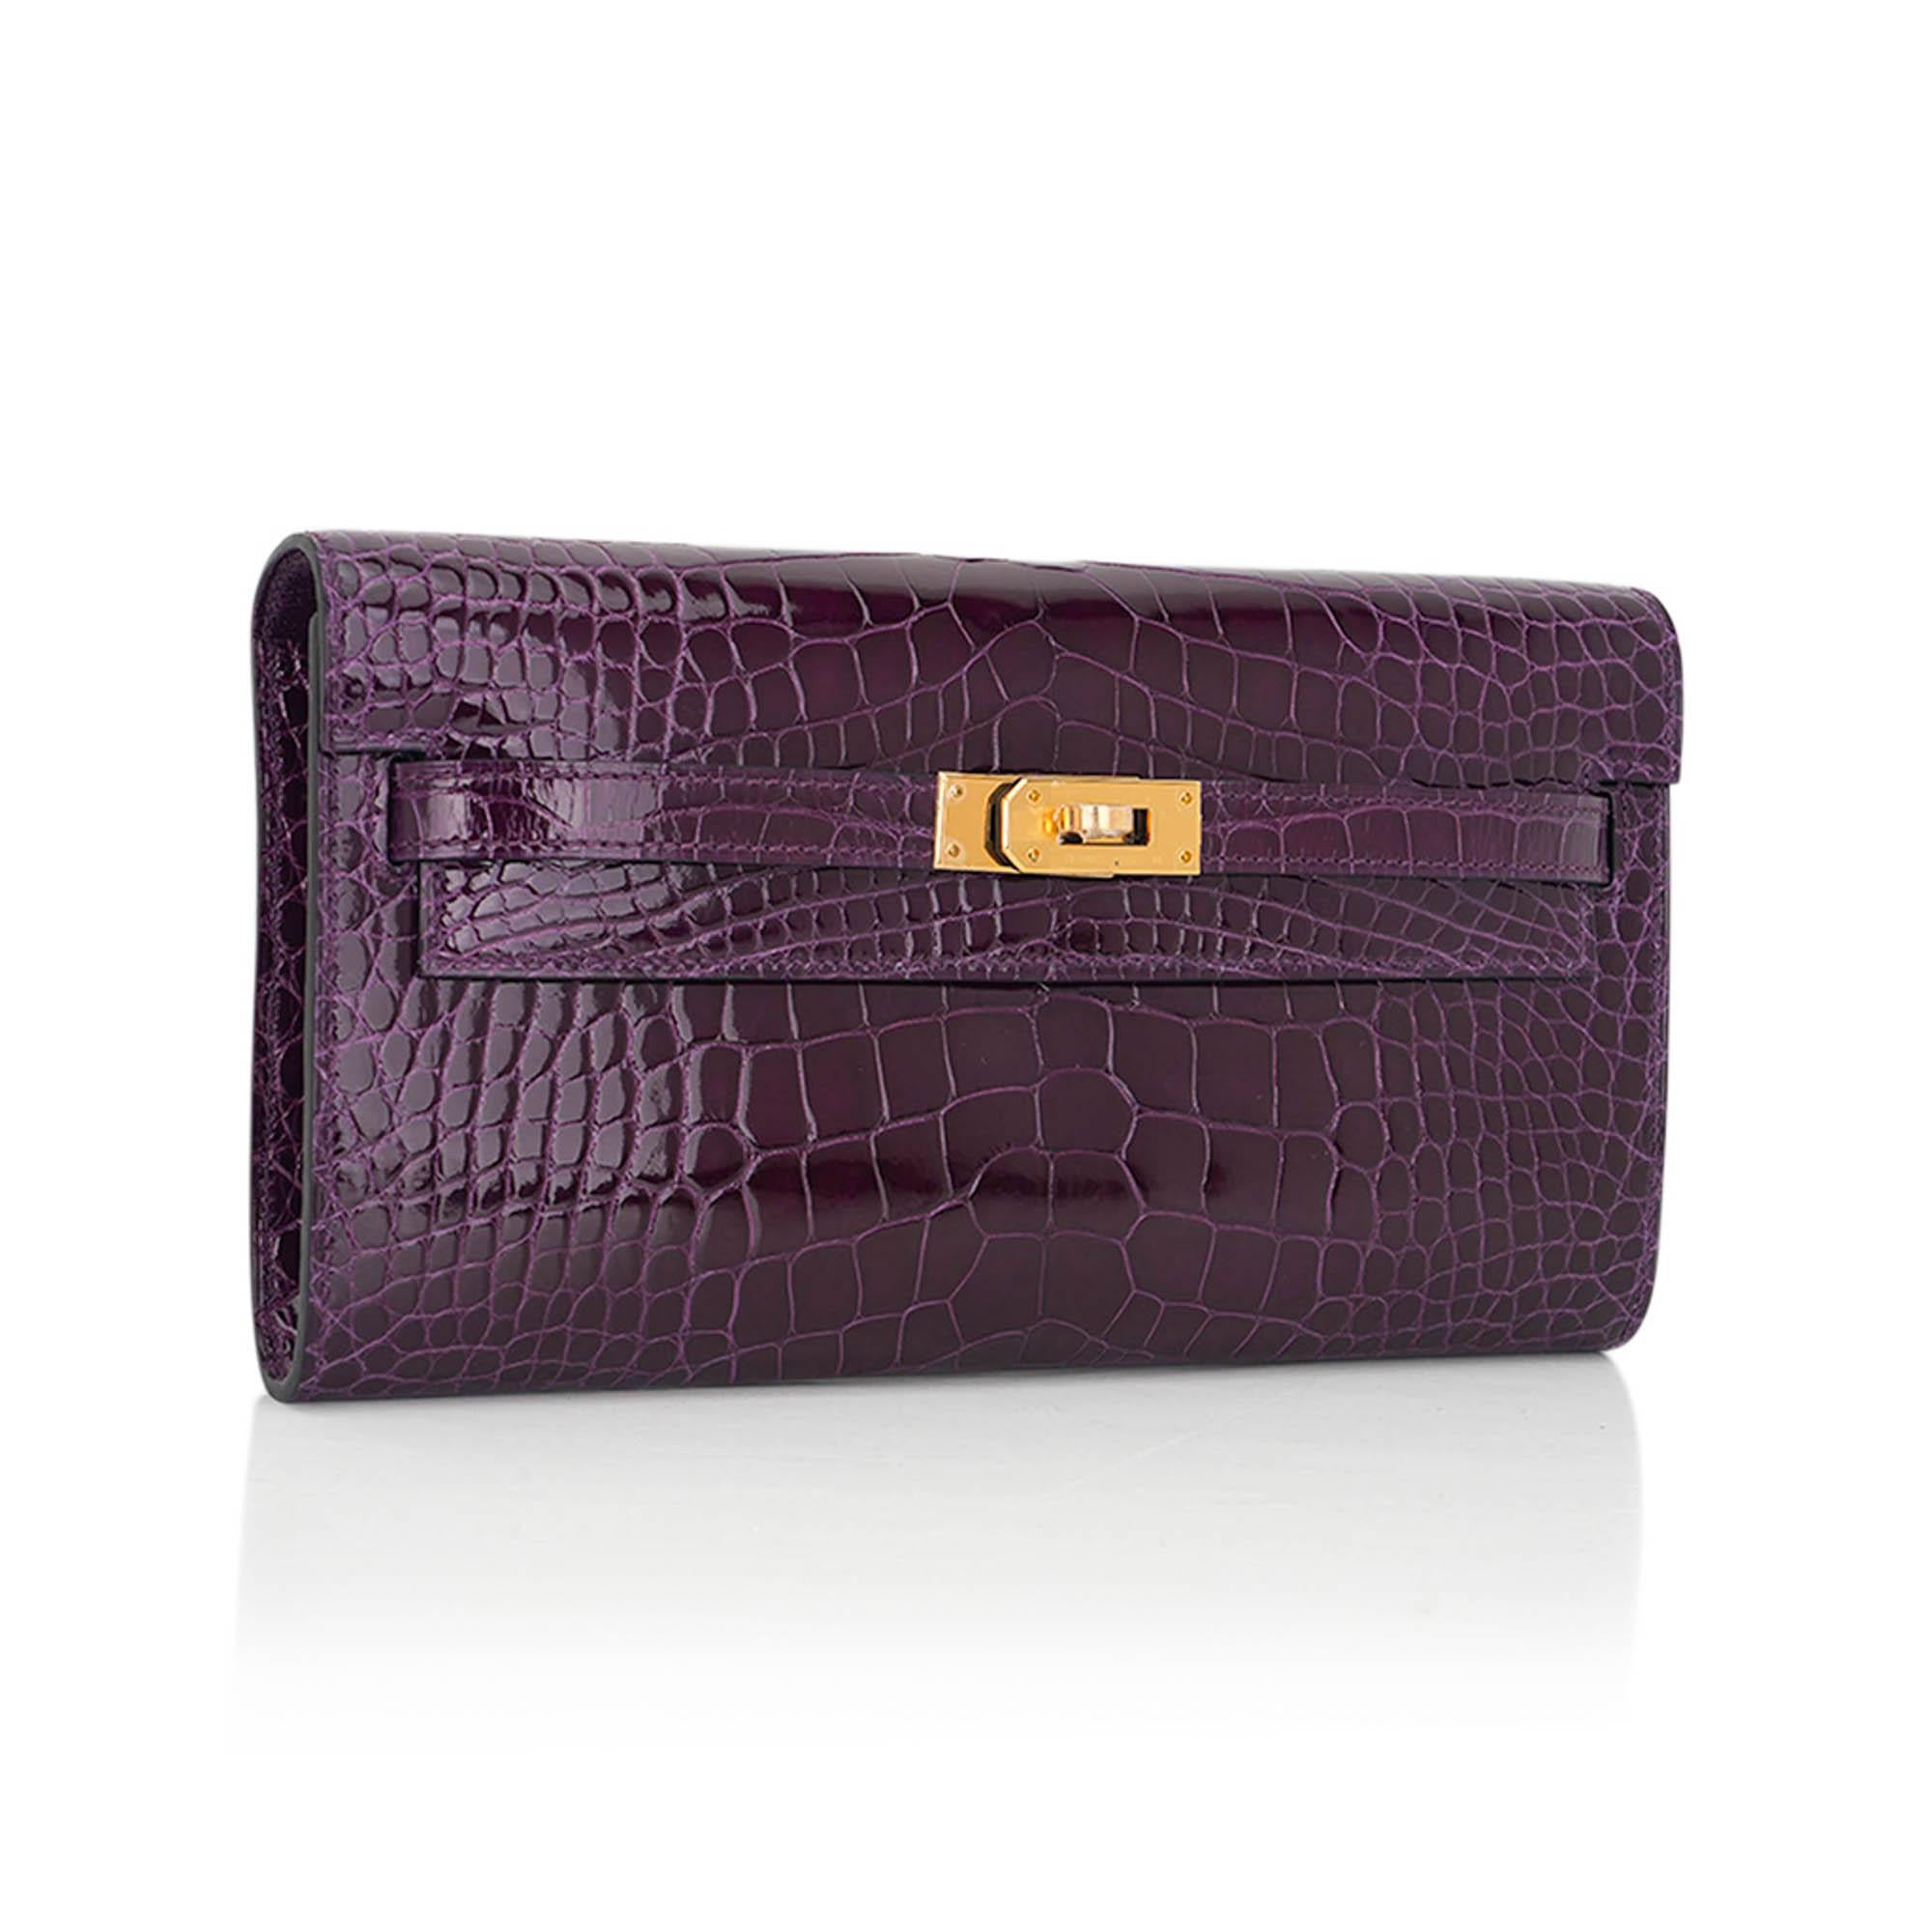 Mightychic offers an Hermes Kelly Classique To Go wallet featured in richly saturated Cassis Alligator
Rich Gold hardware accentuates this exquisite limited edition Hermes Cassis Alligator crossbody Kelly bag.
A stunning jewel toned warm Plum